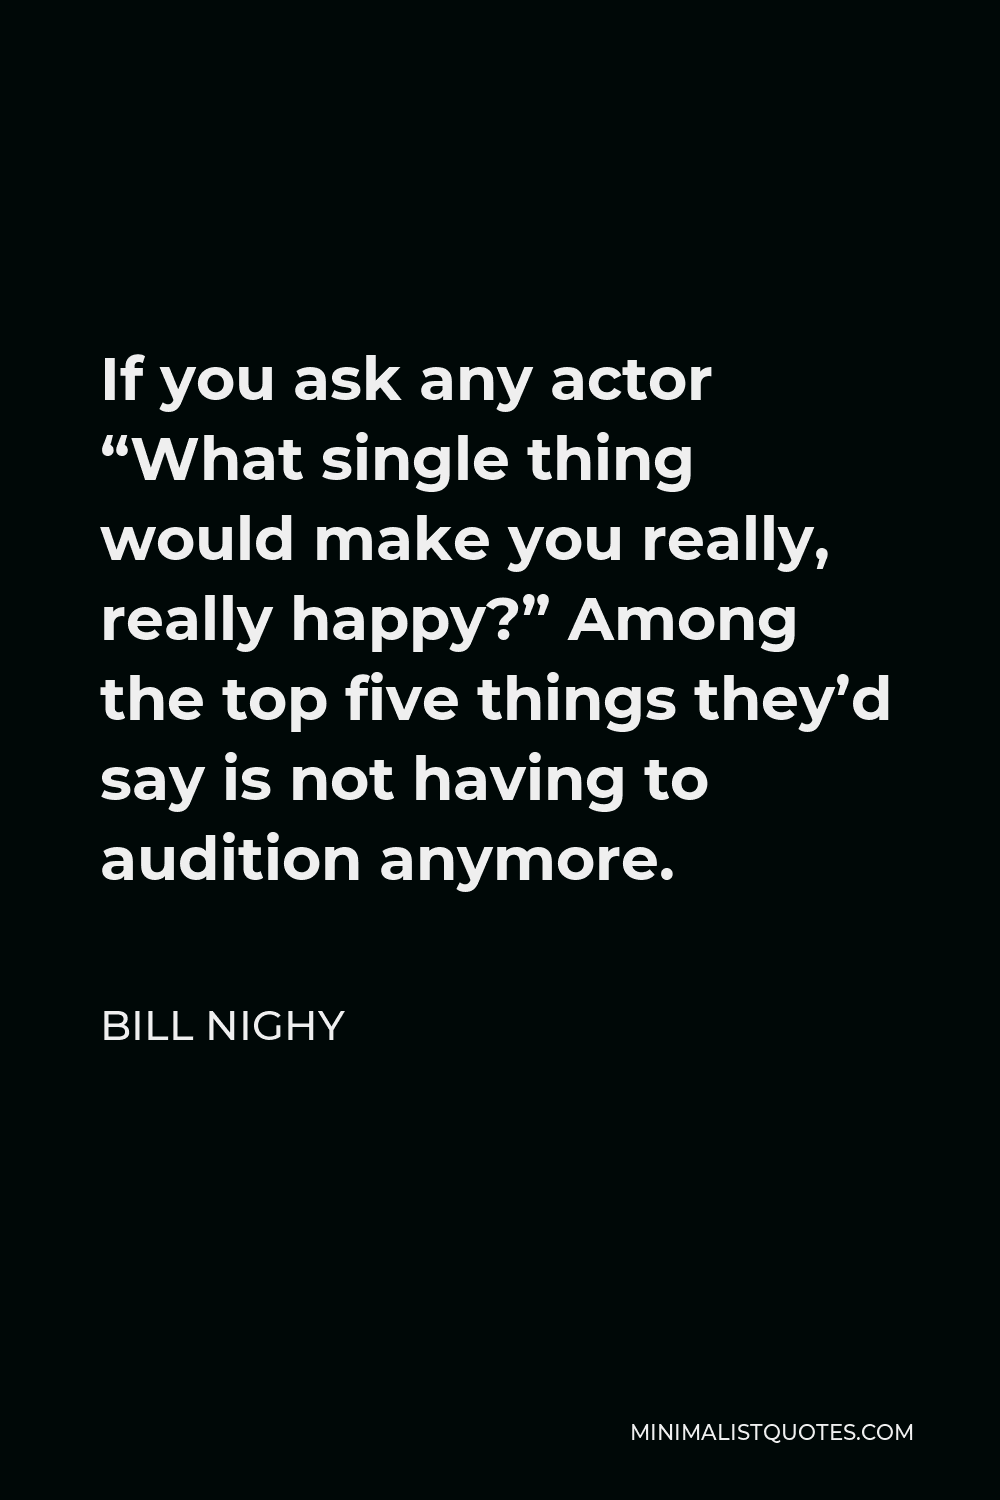 Bill Nighy Quote - If you ask any actor “What single thing would make you really, really happy?” Among the top five things they’d say is not having to audition anymore.